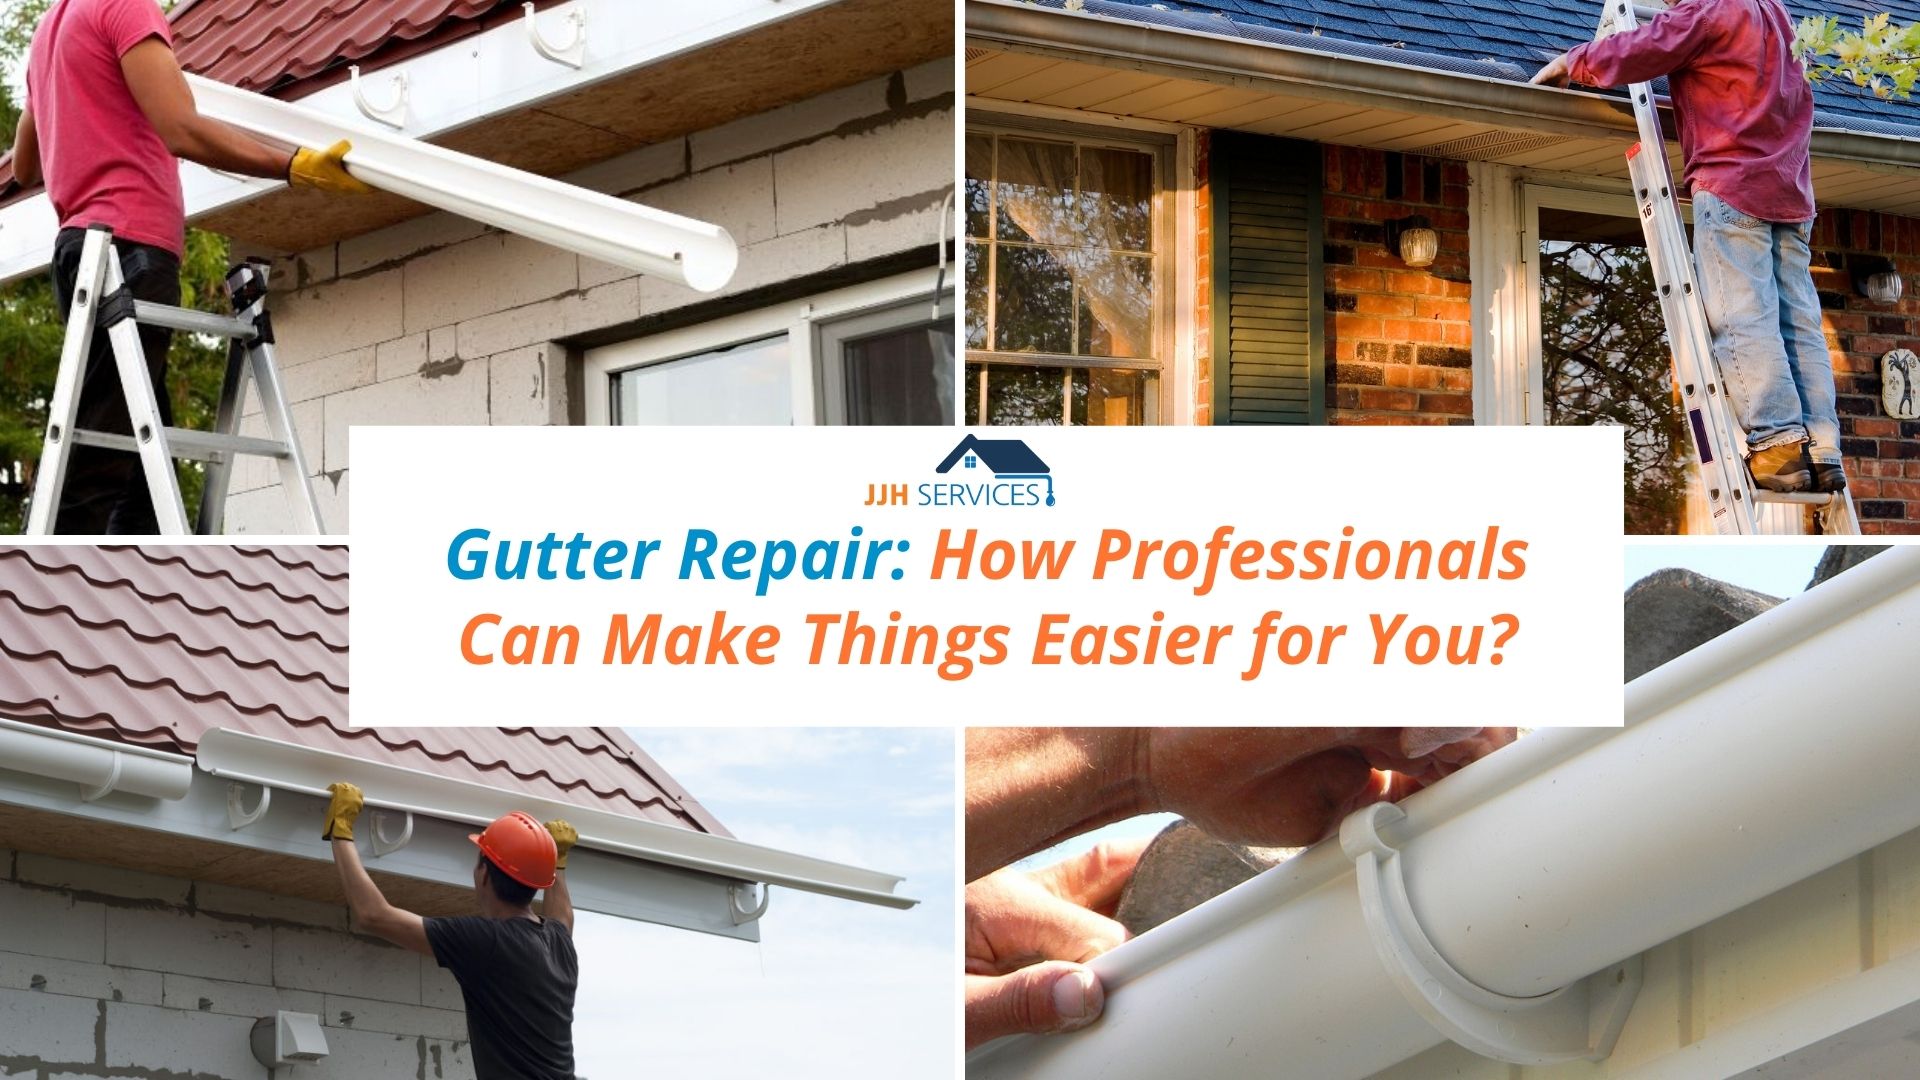 Gutter Repair: How Professionals Can Make Things Easier for You?